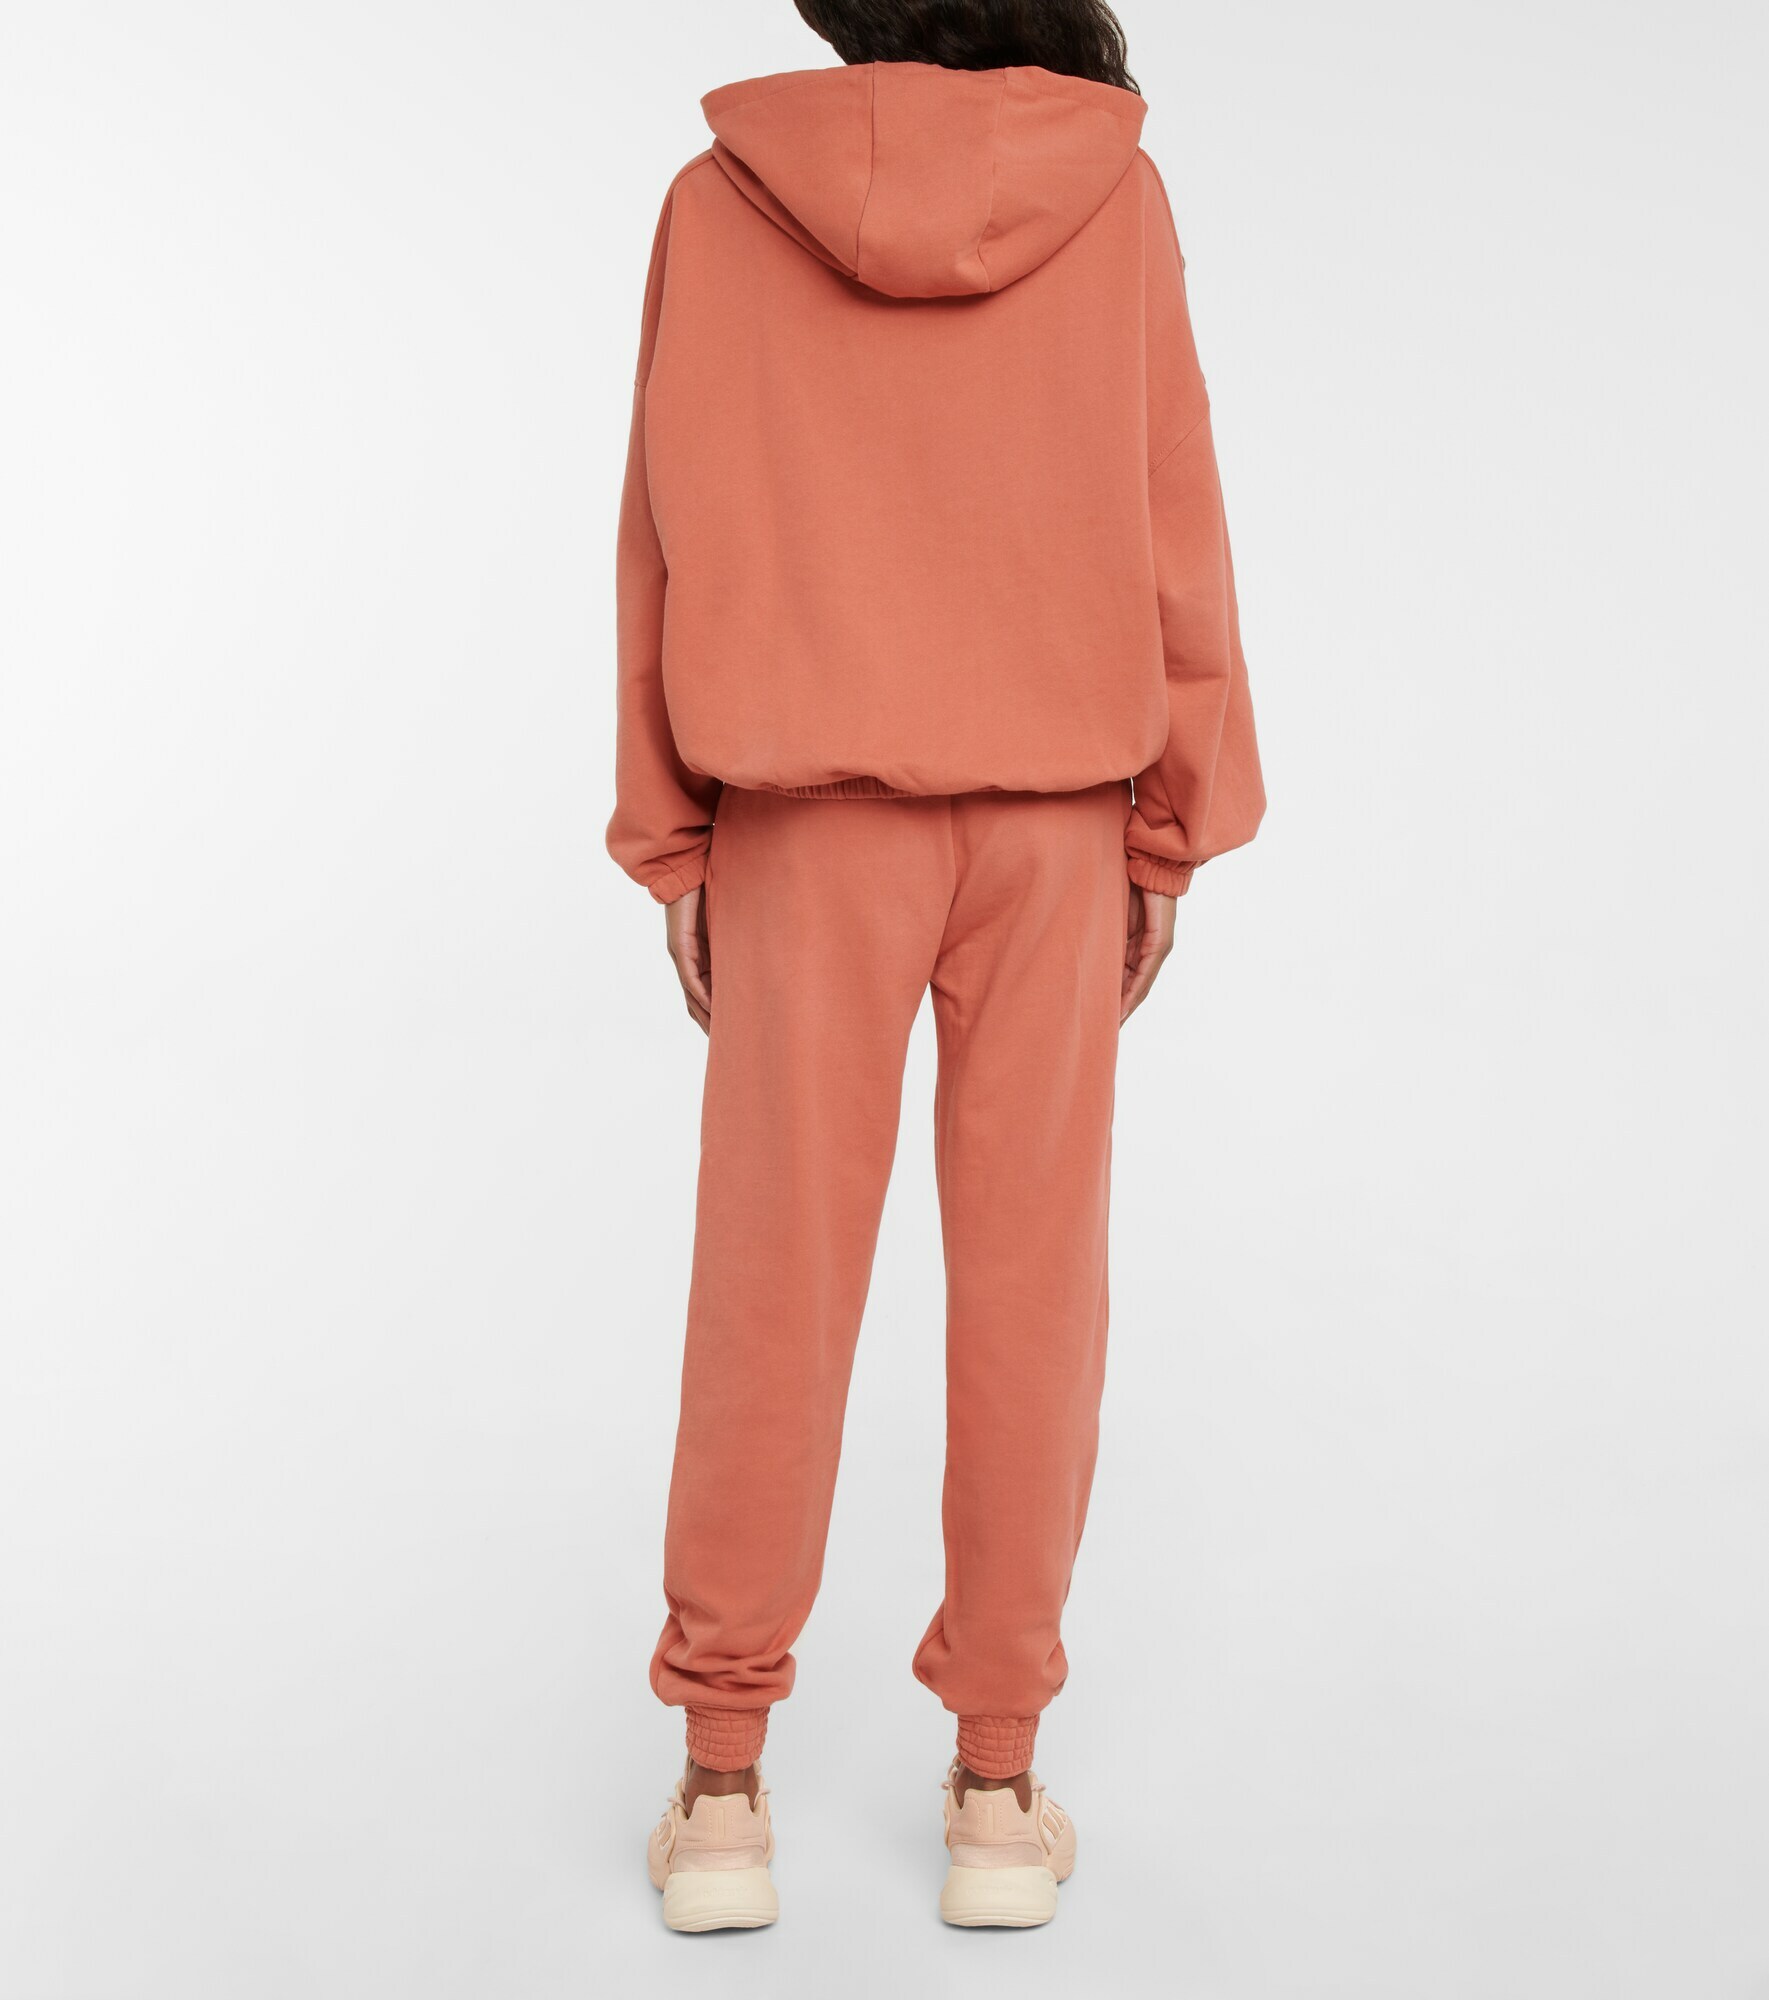 The Upside - Caprice Amelie cotton hoodie The Upside